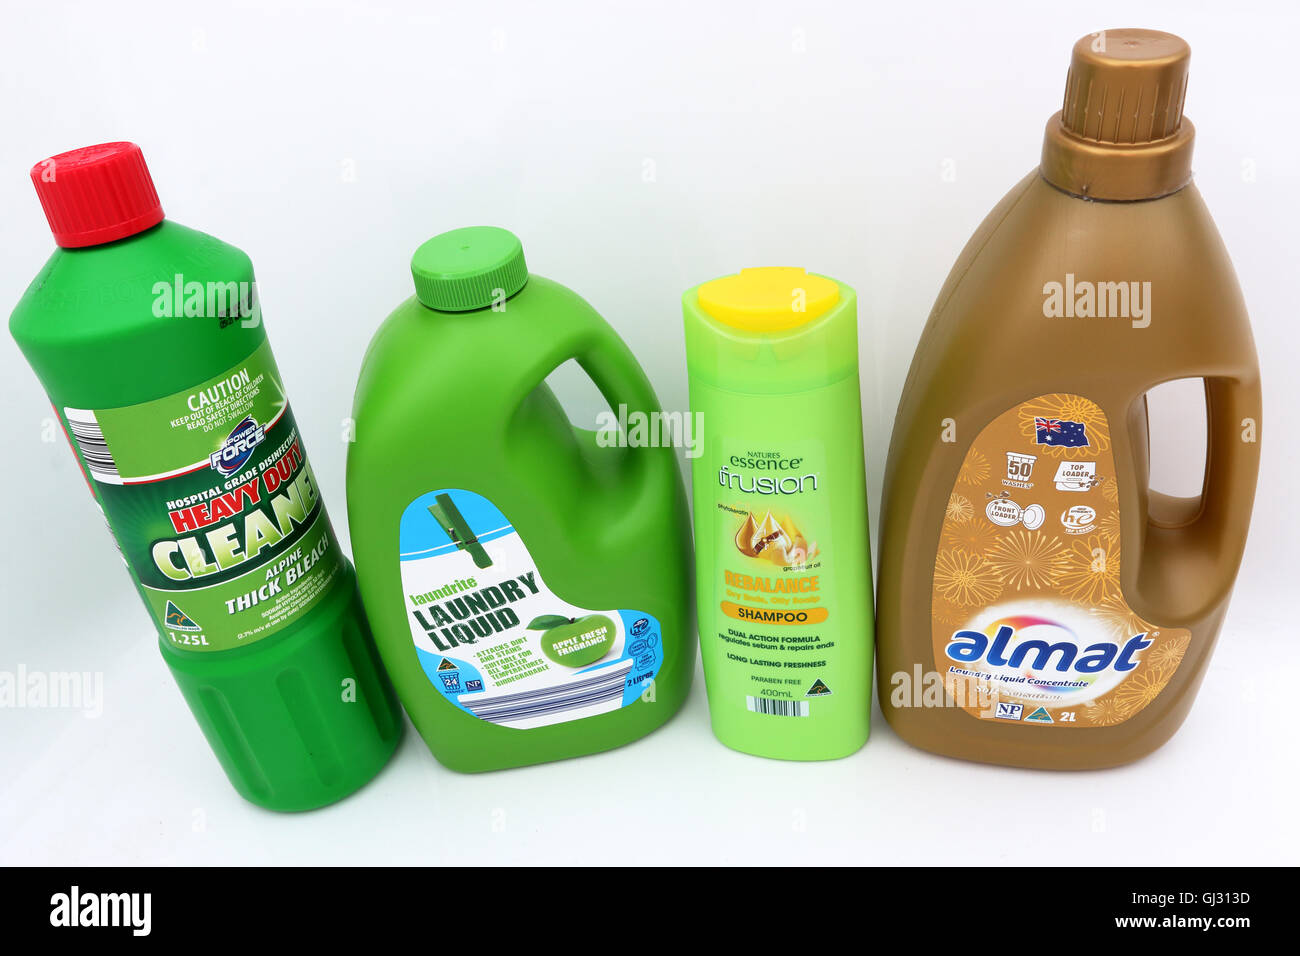 Aldi Australia household products such as bleach, laundry liquid and shampoo on white background Stock Photo